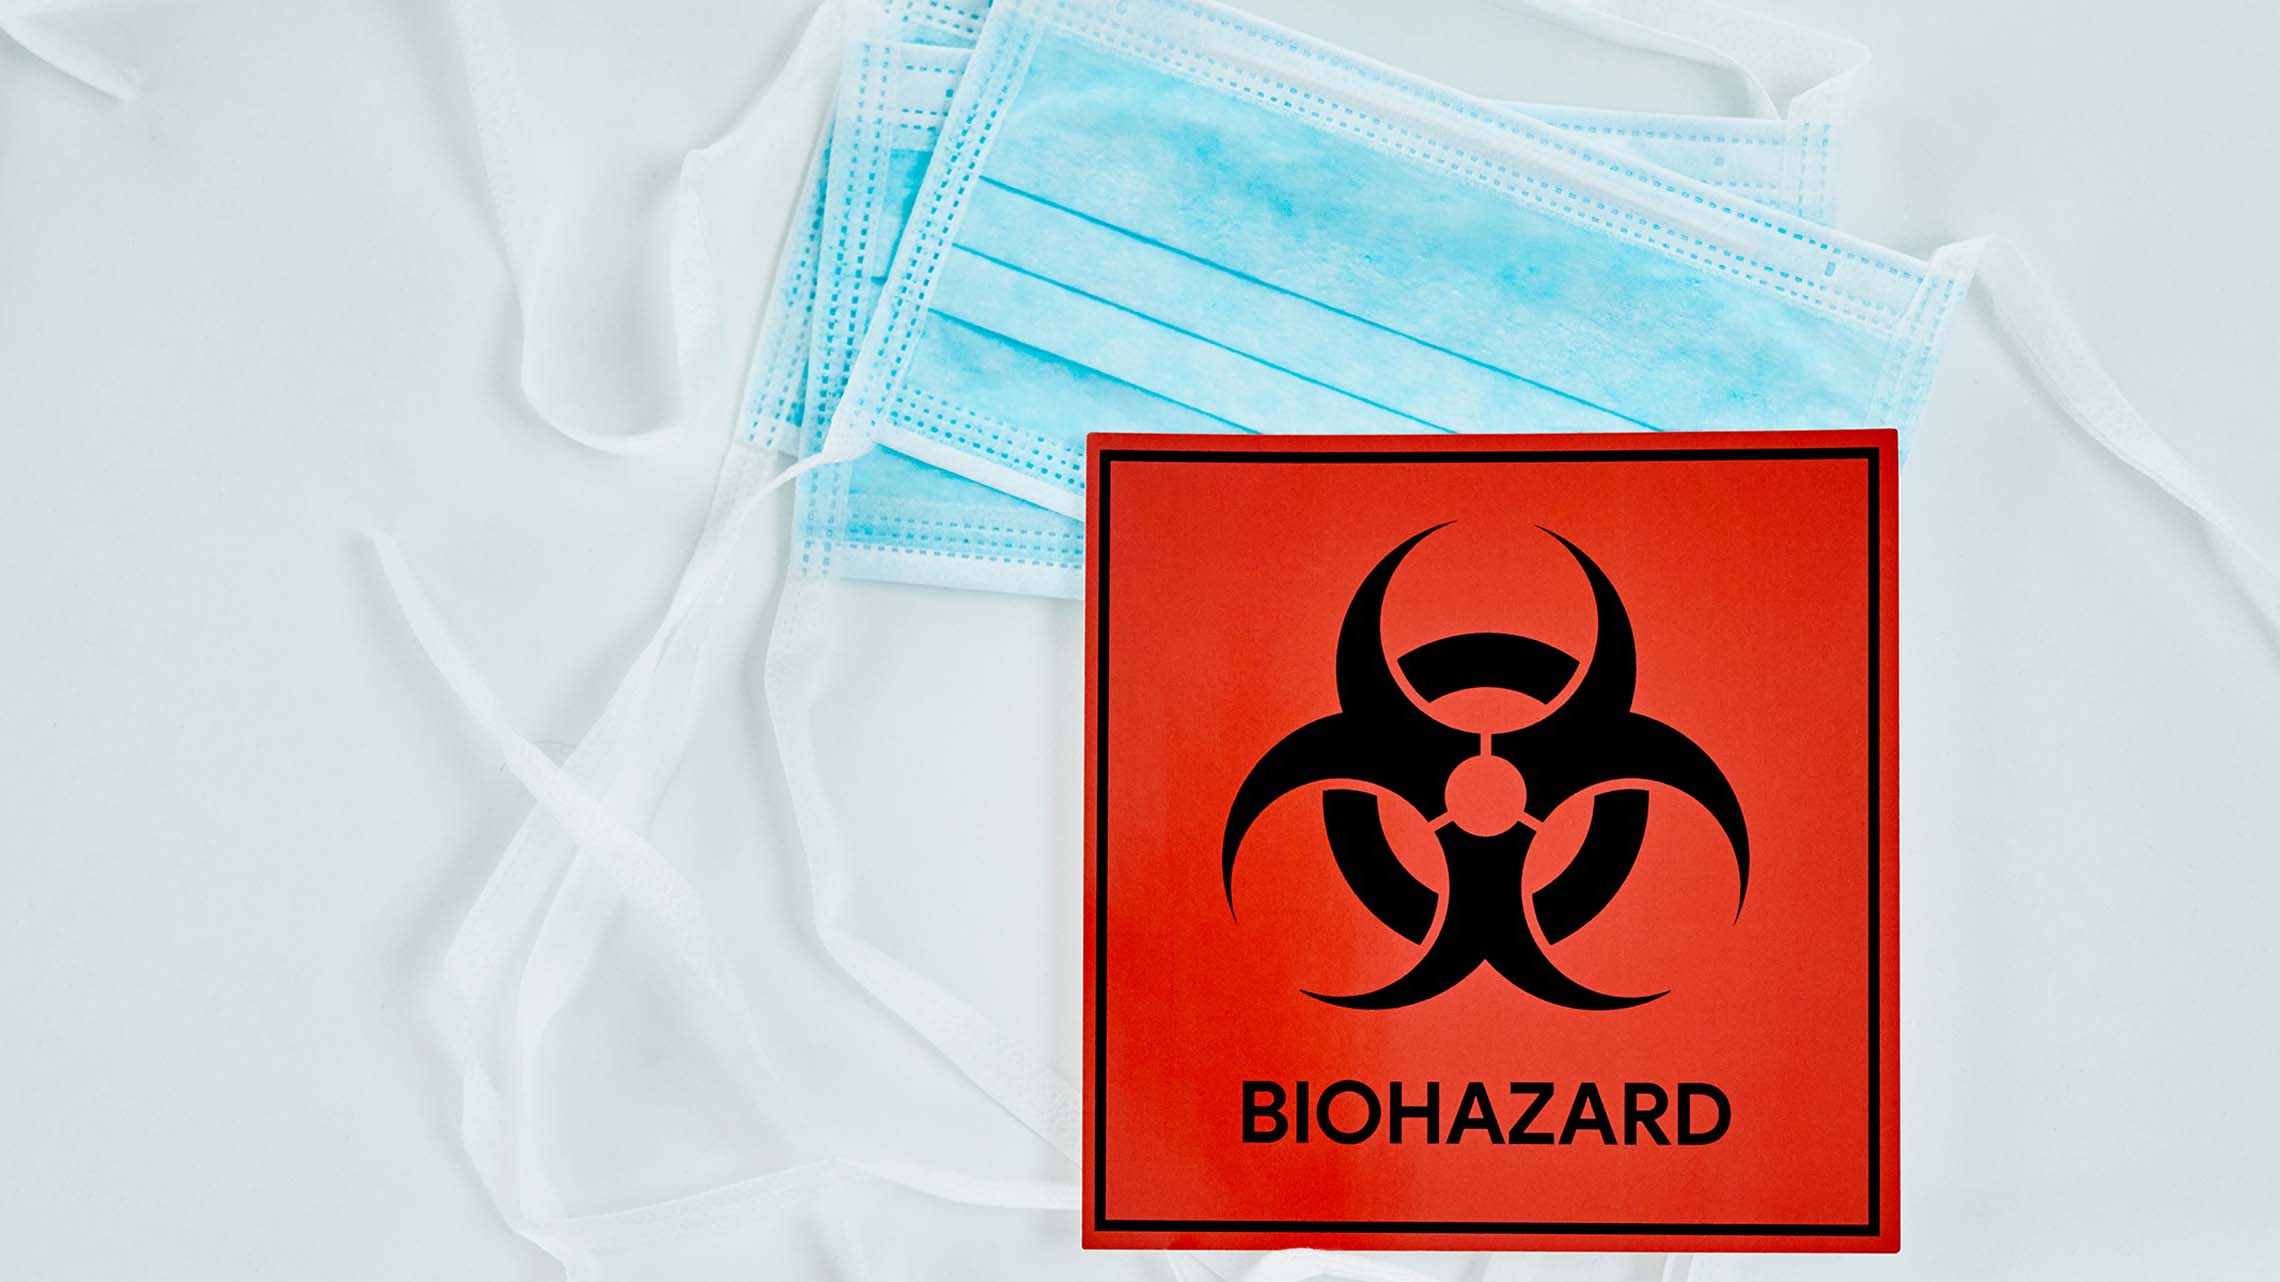 Biohazard sign and mask